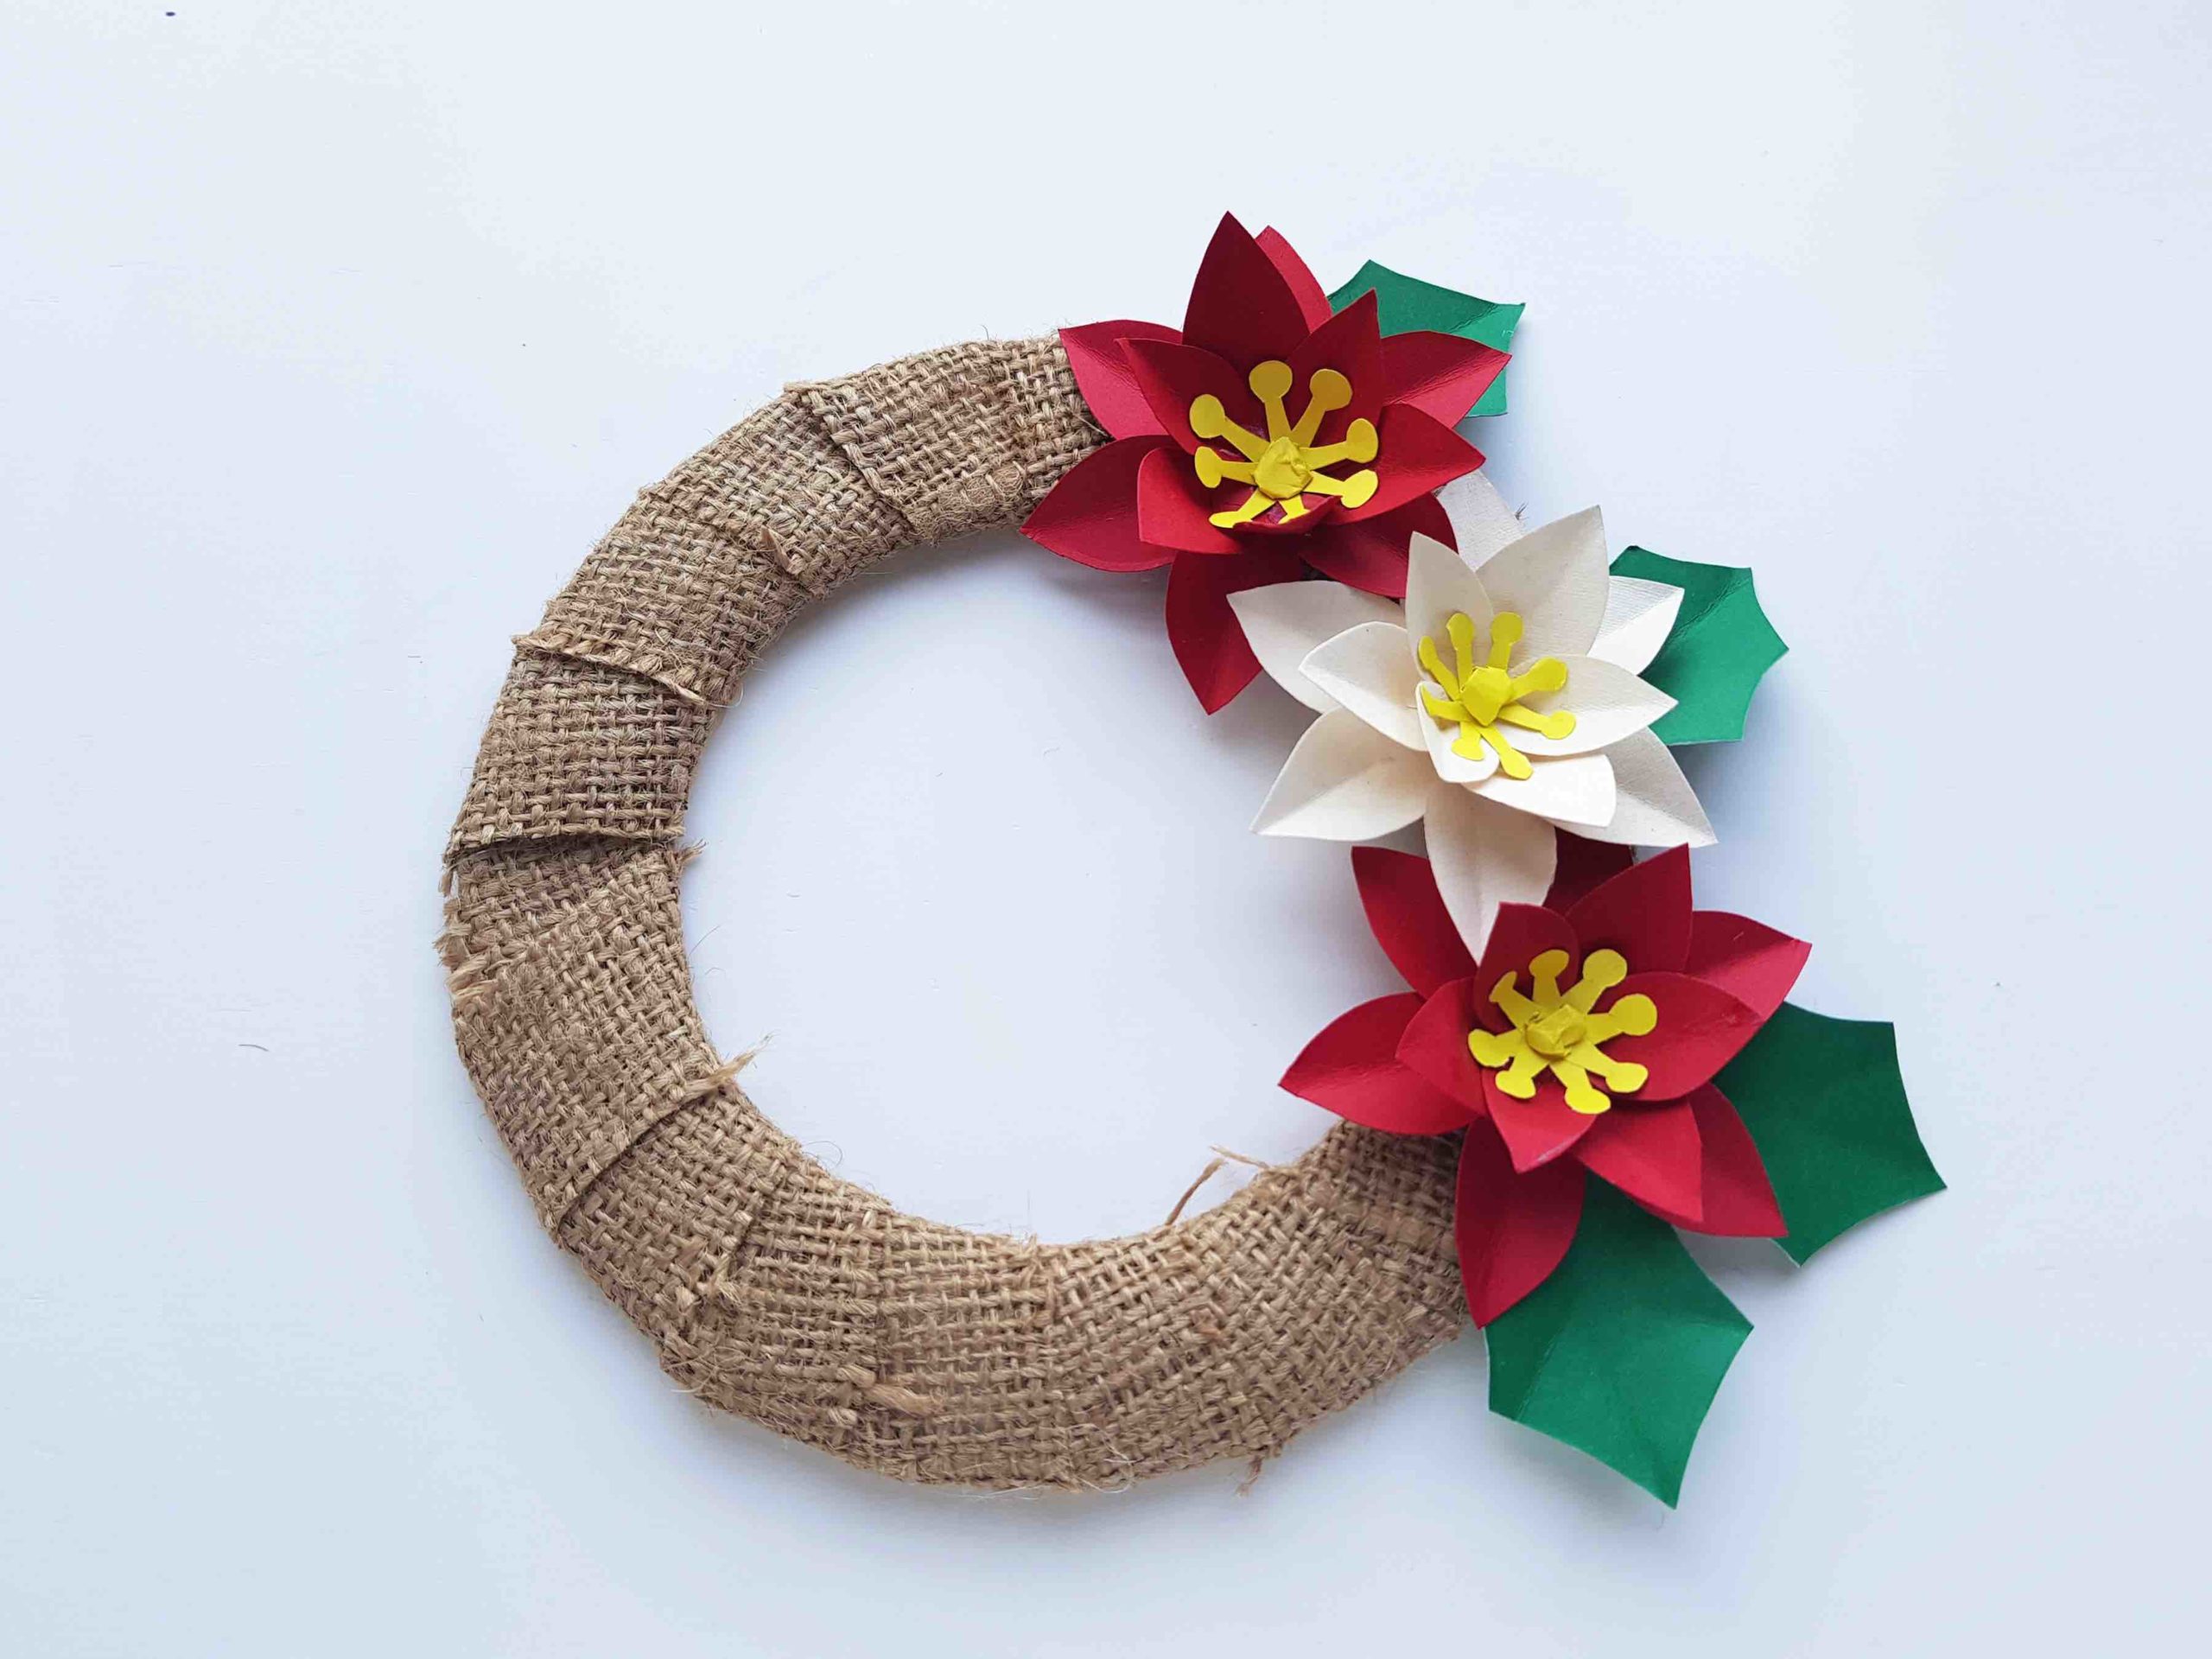 Hawaiian Christmas Decorations: How to Make a Poinsettia Wreath, a step by step tutorial featured by top Hawaii blog, Hawaii Travel with Kids.